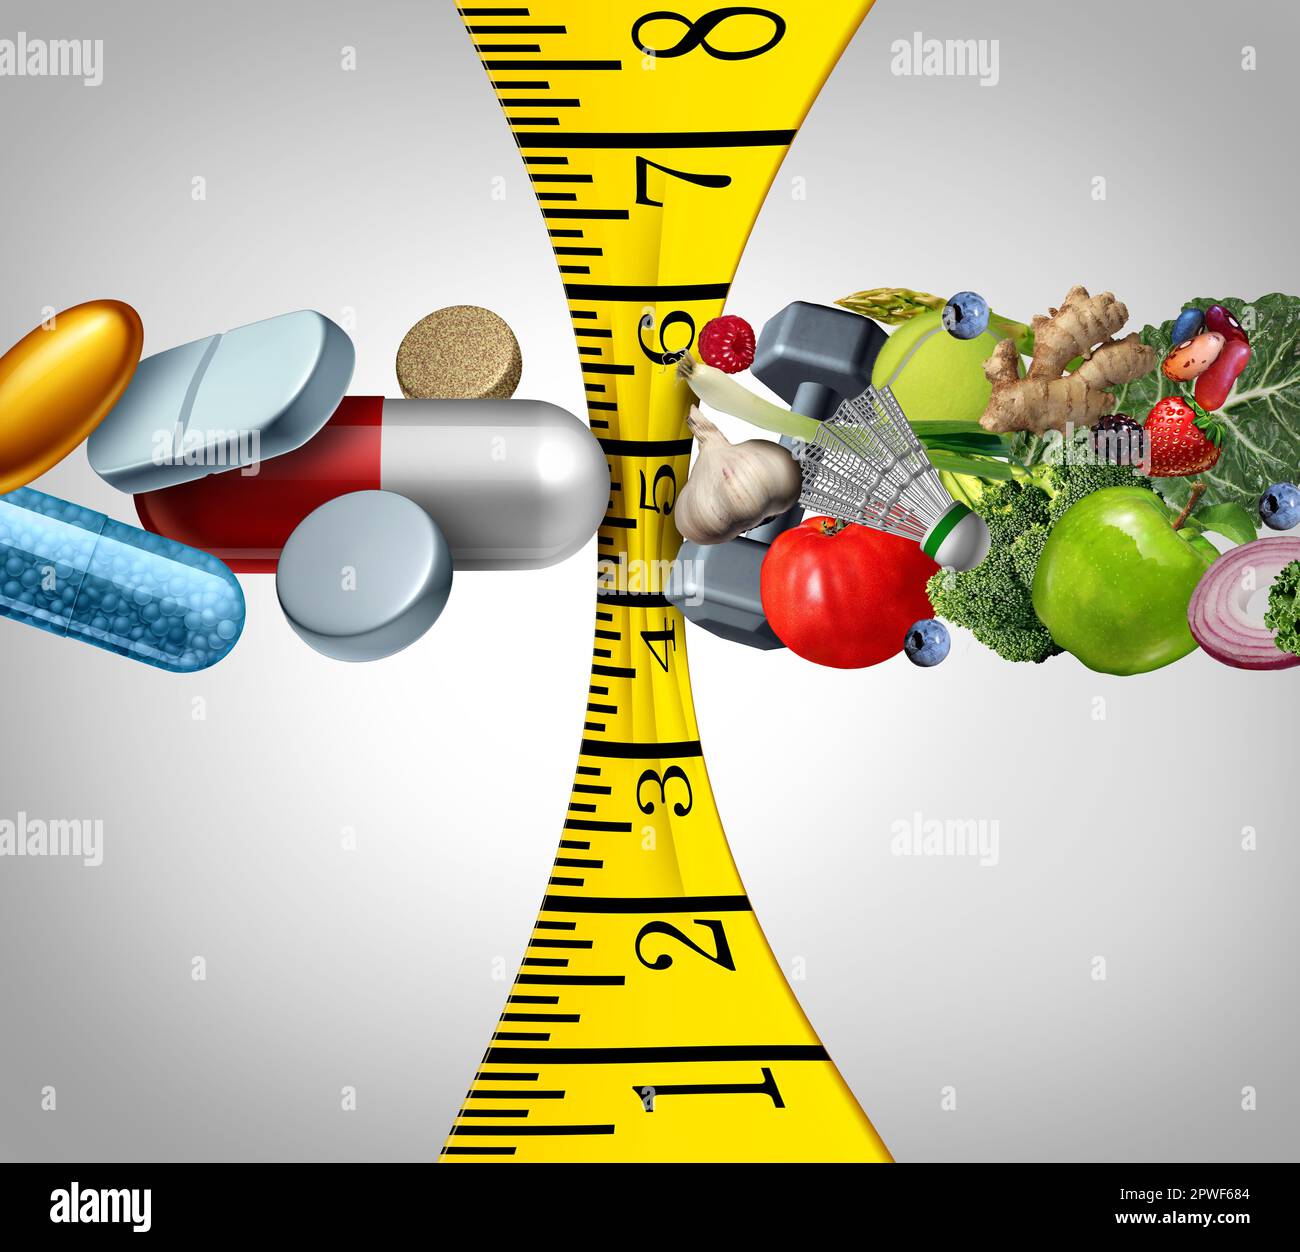 Weight loss challenge as Obesity prescription drug and pharmaceutical diet pills versus eating healthy food and execising to lose pounds as a health Stock Photo